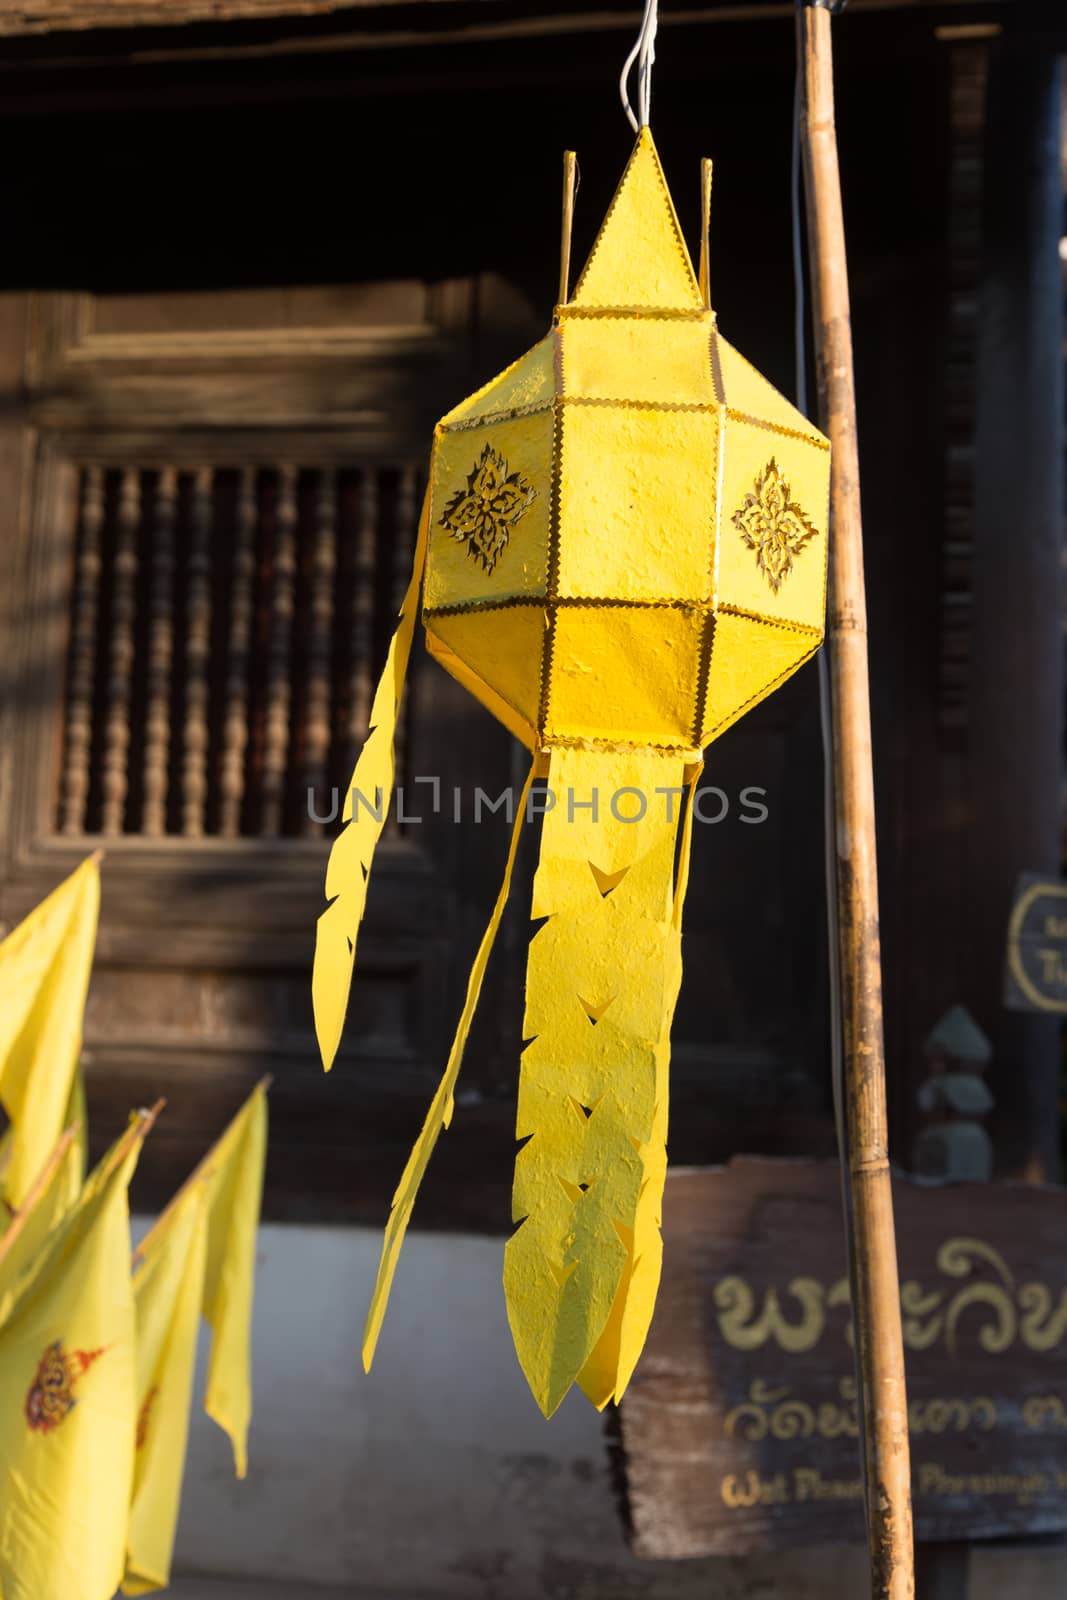 Wat Phan Tao, Chiang Mai Thailand 12.11.2015 famous temple with yellow lanterns by kgboxford